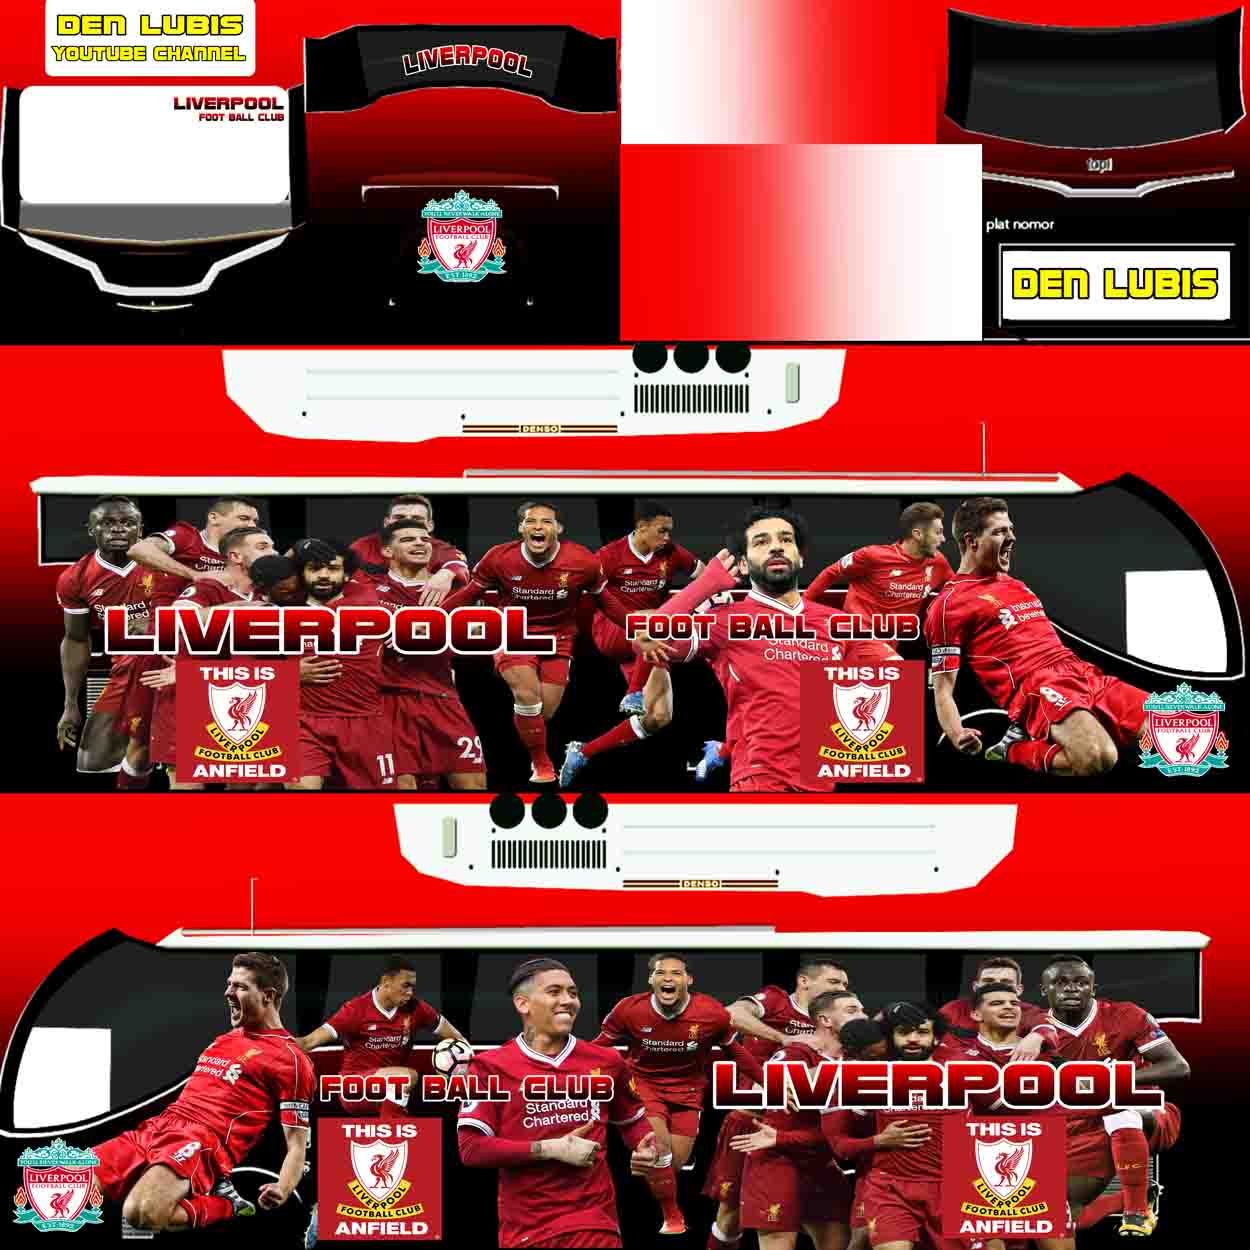 livery bus liverpool bussid